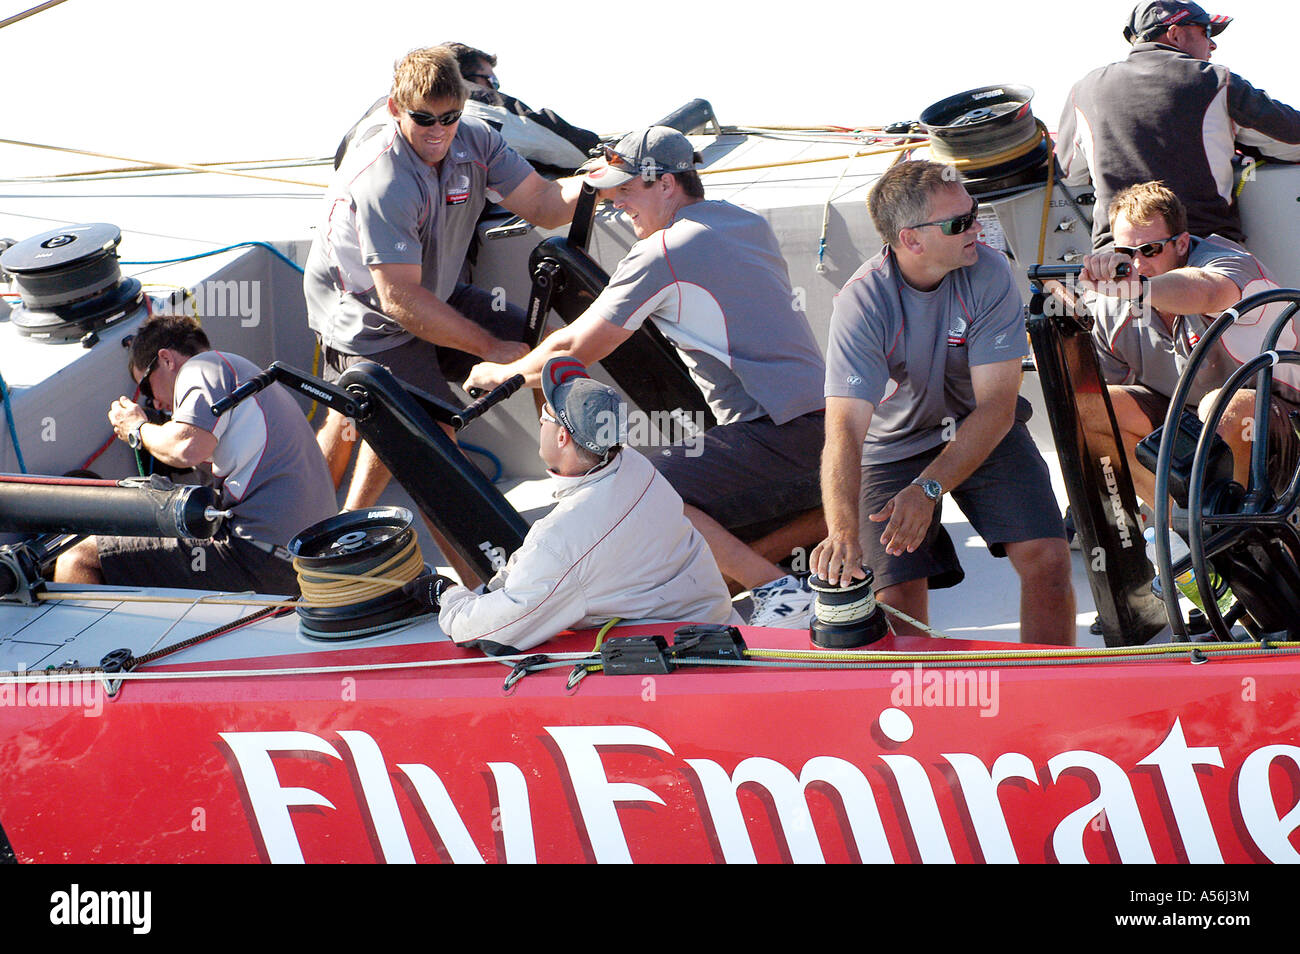 Emirates Team New Zealand race in NZL-81 in Louis Vuitton Acts 2 Stock Photo: 11214151 - Alamy